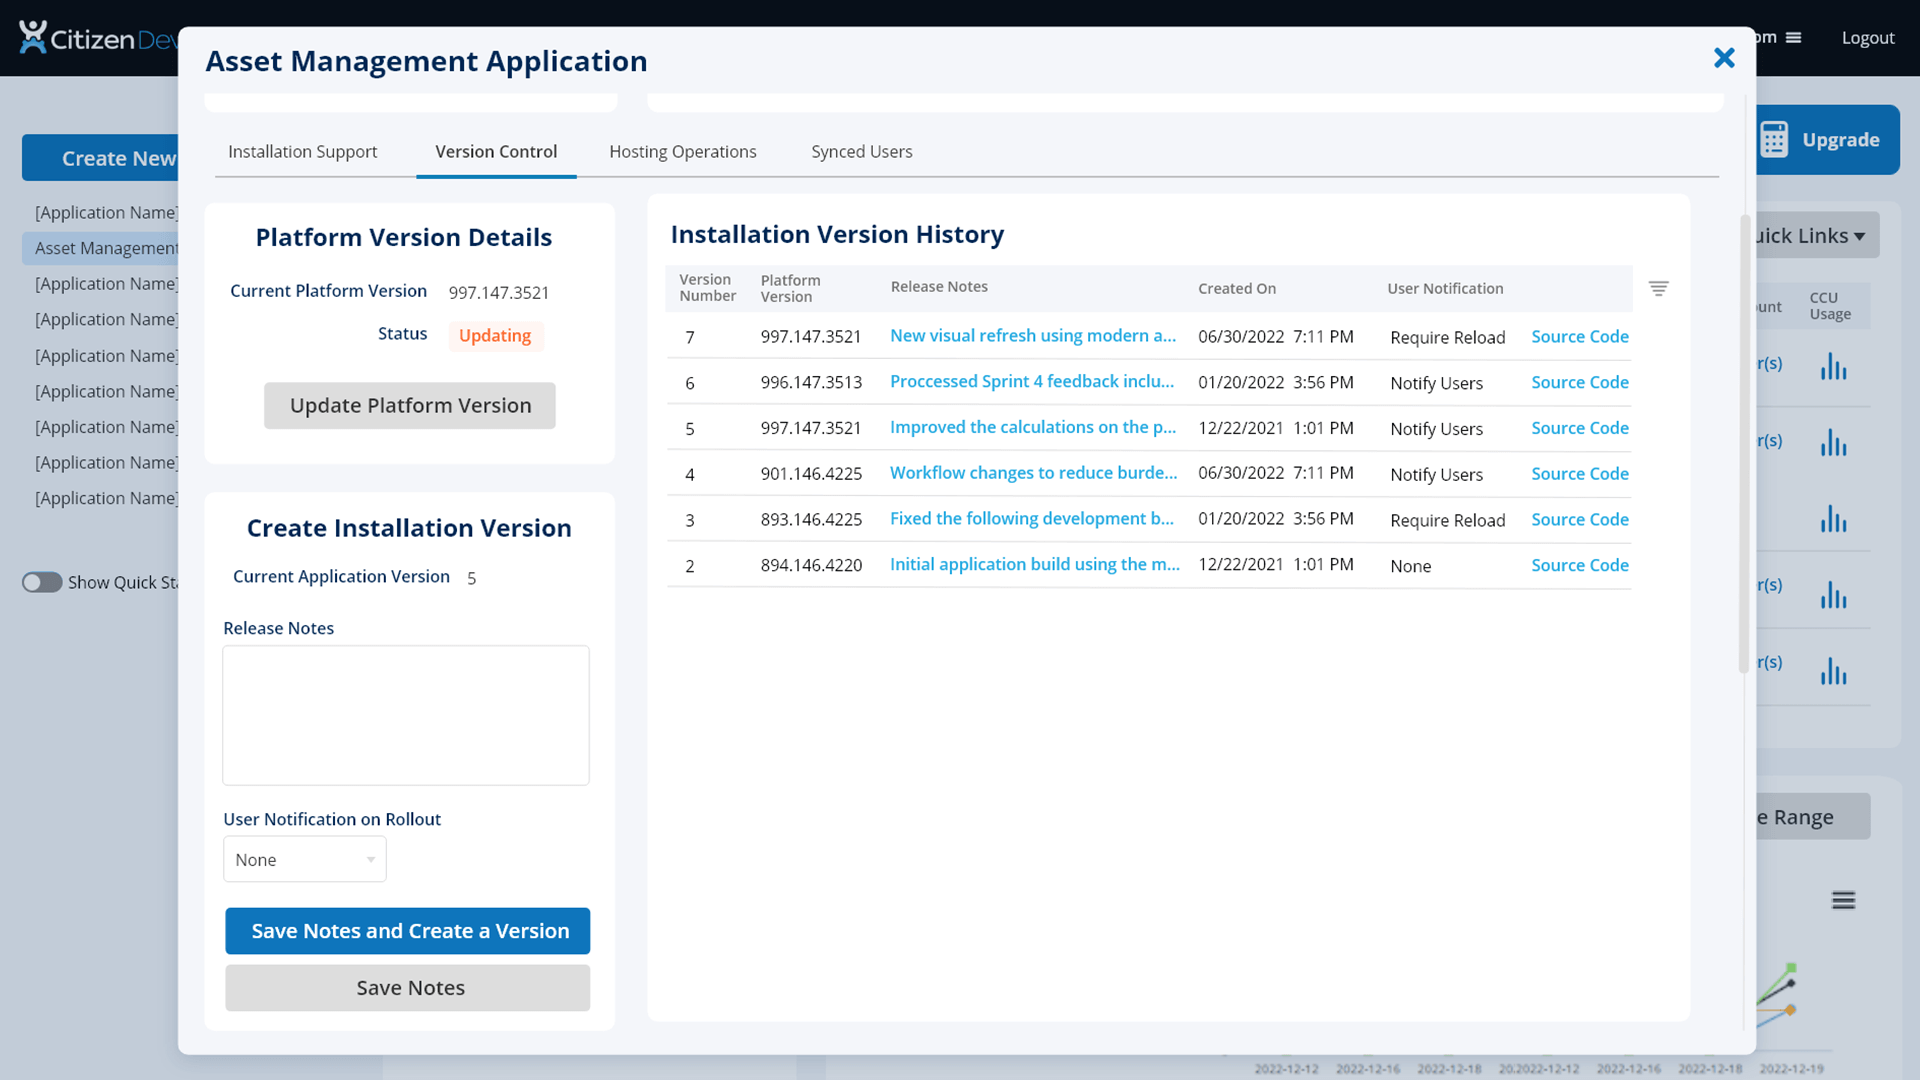 Screenshot of how to manage your application Version Control using tools like Platform Version Details, Create Installation Versions, Installation Version History, without on the CitizenDeveloper full-stack platform